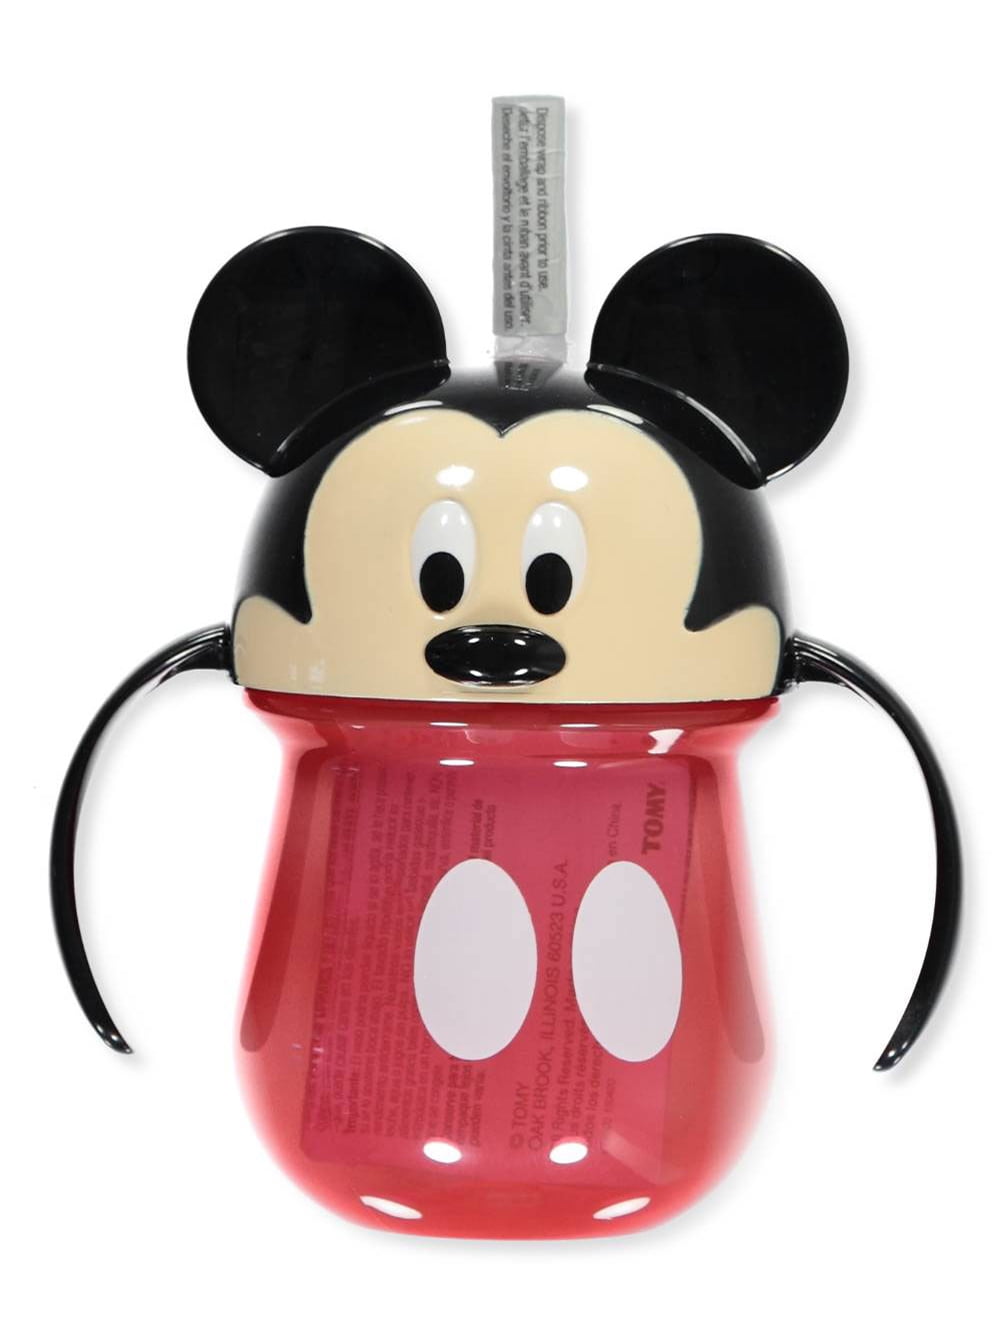 The First Years Disney Mickey Mouse Toddler Straw Cups - Disney Toddler Cups with Name Tag Charm - 18 Months and Up - 10 oz - 2 Count